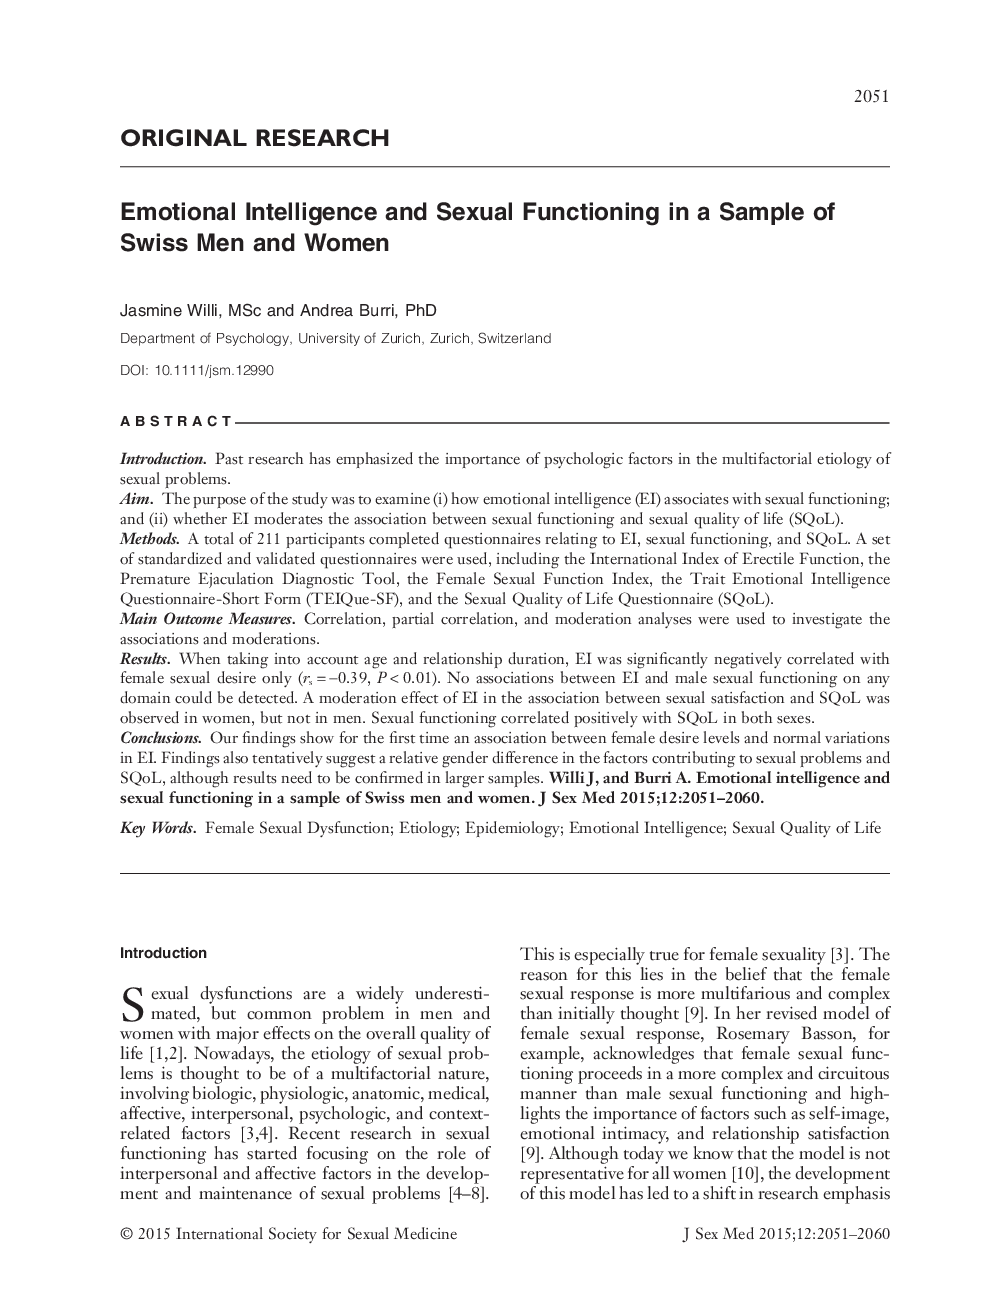 Emotional Intelligence and Sexual Functioning in a Sample of Swiss Men and Women